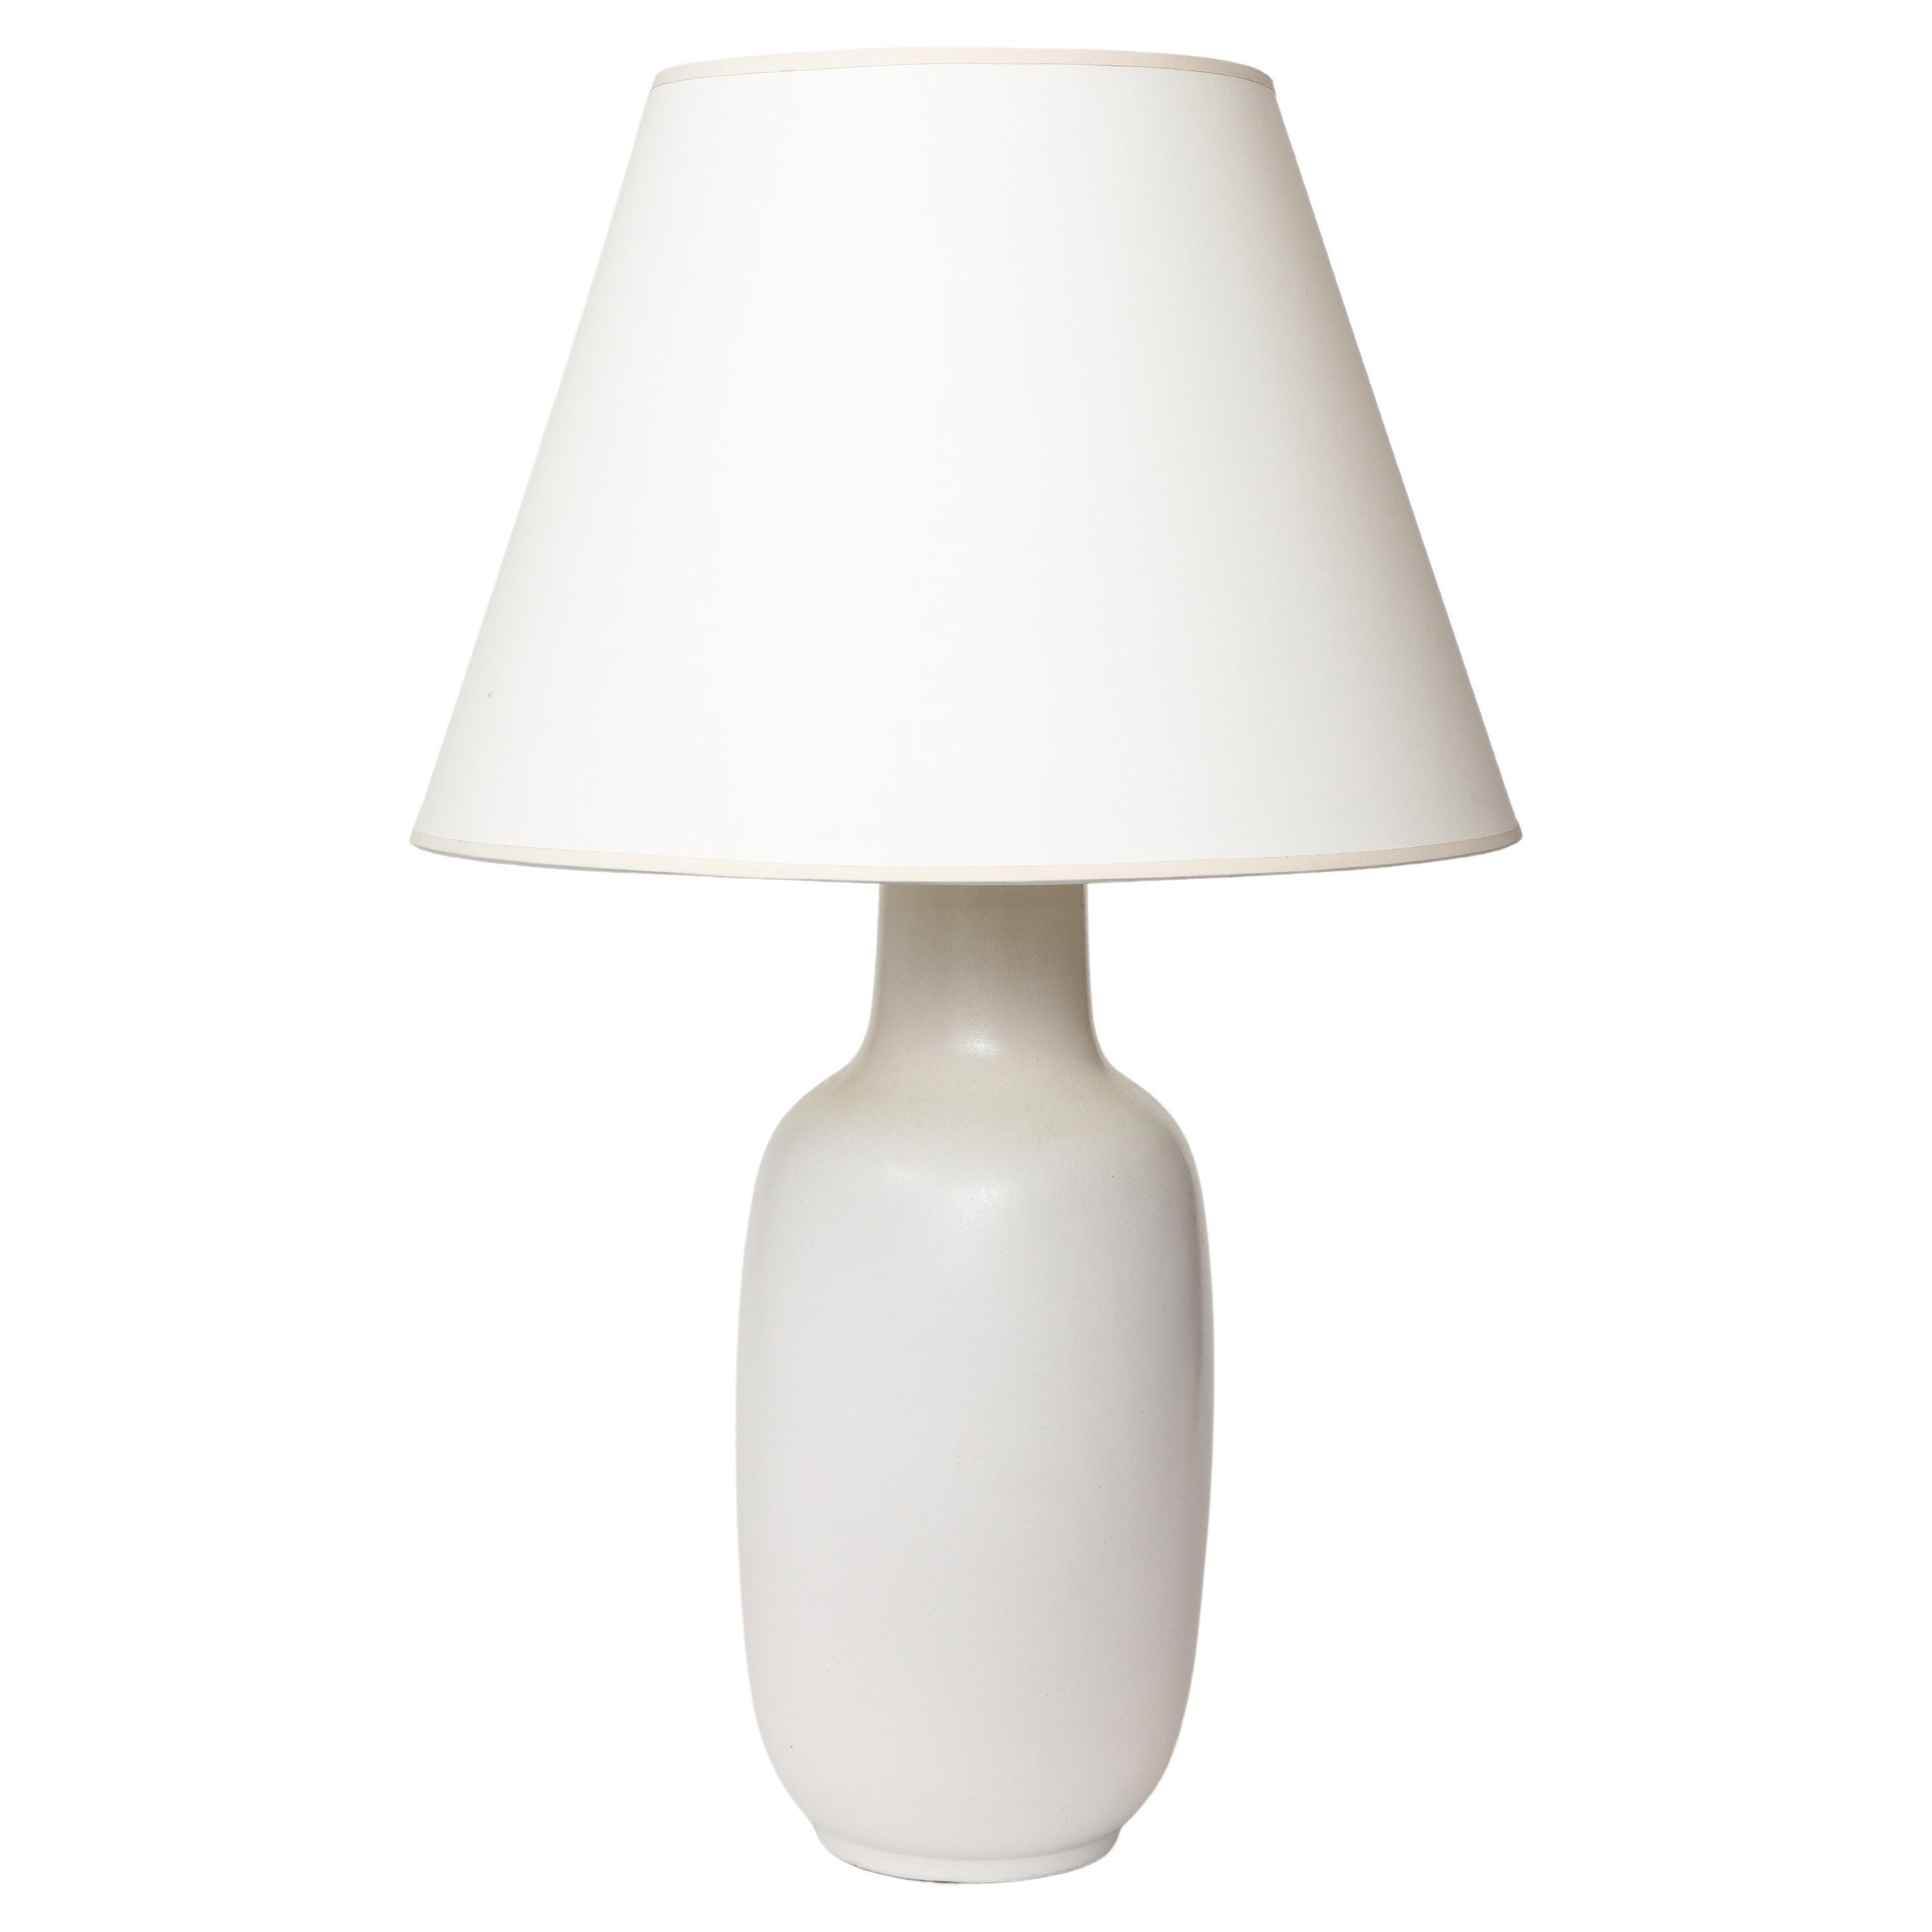 Glazed Ceramic Table Lamp by Design Technics, United States, c. 1960 For Sale